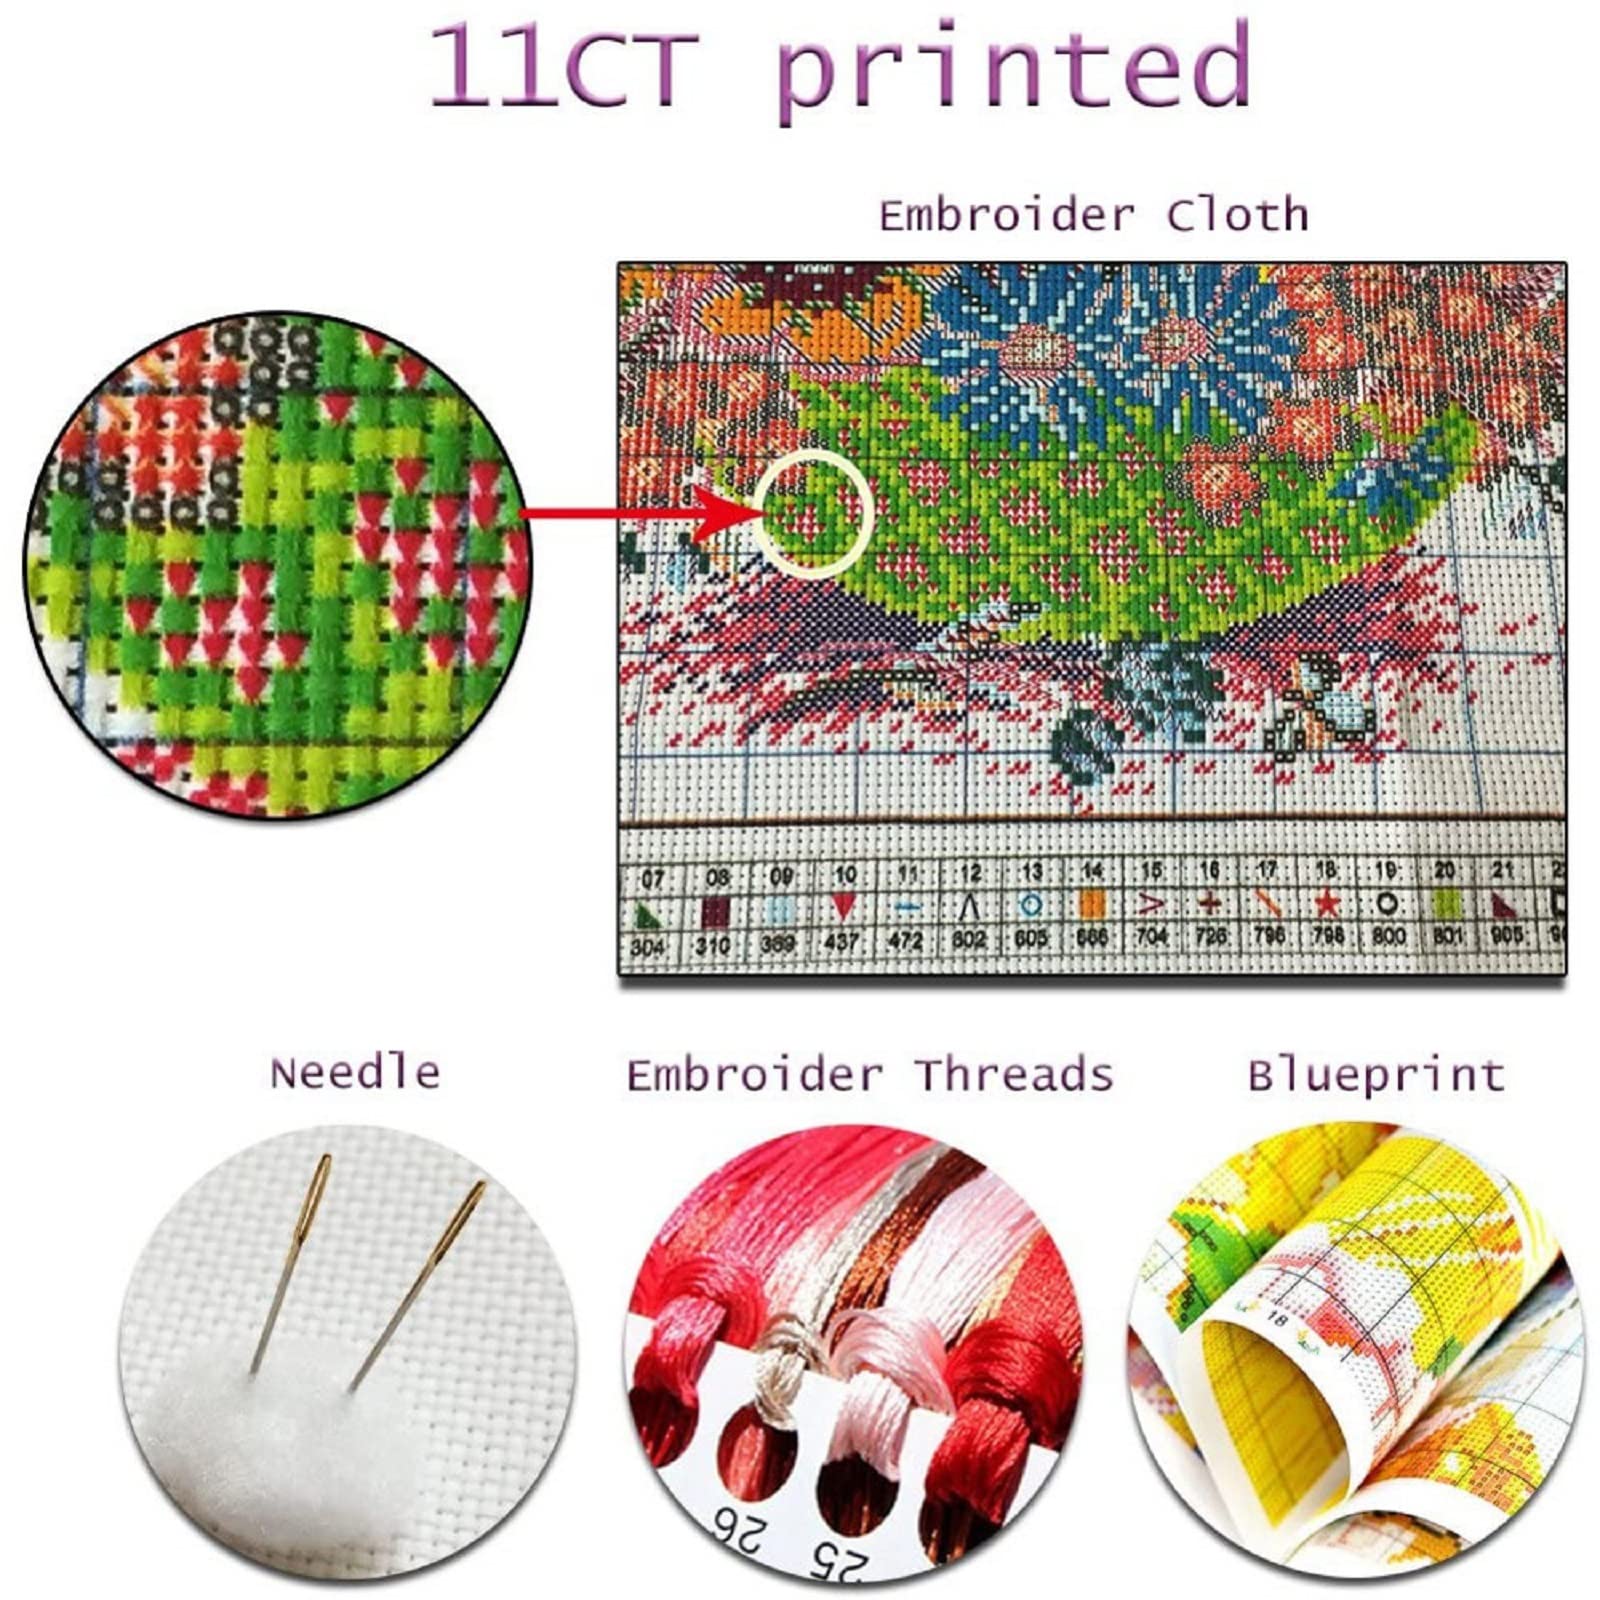 Embroidery Kit Cross Stitch Kit for Adults Beginners Printed